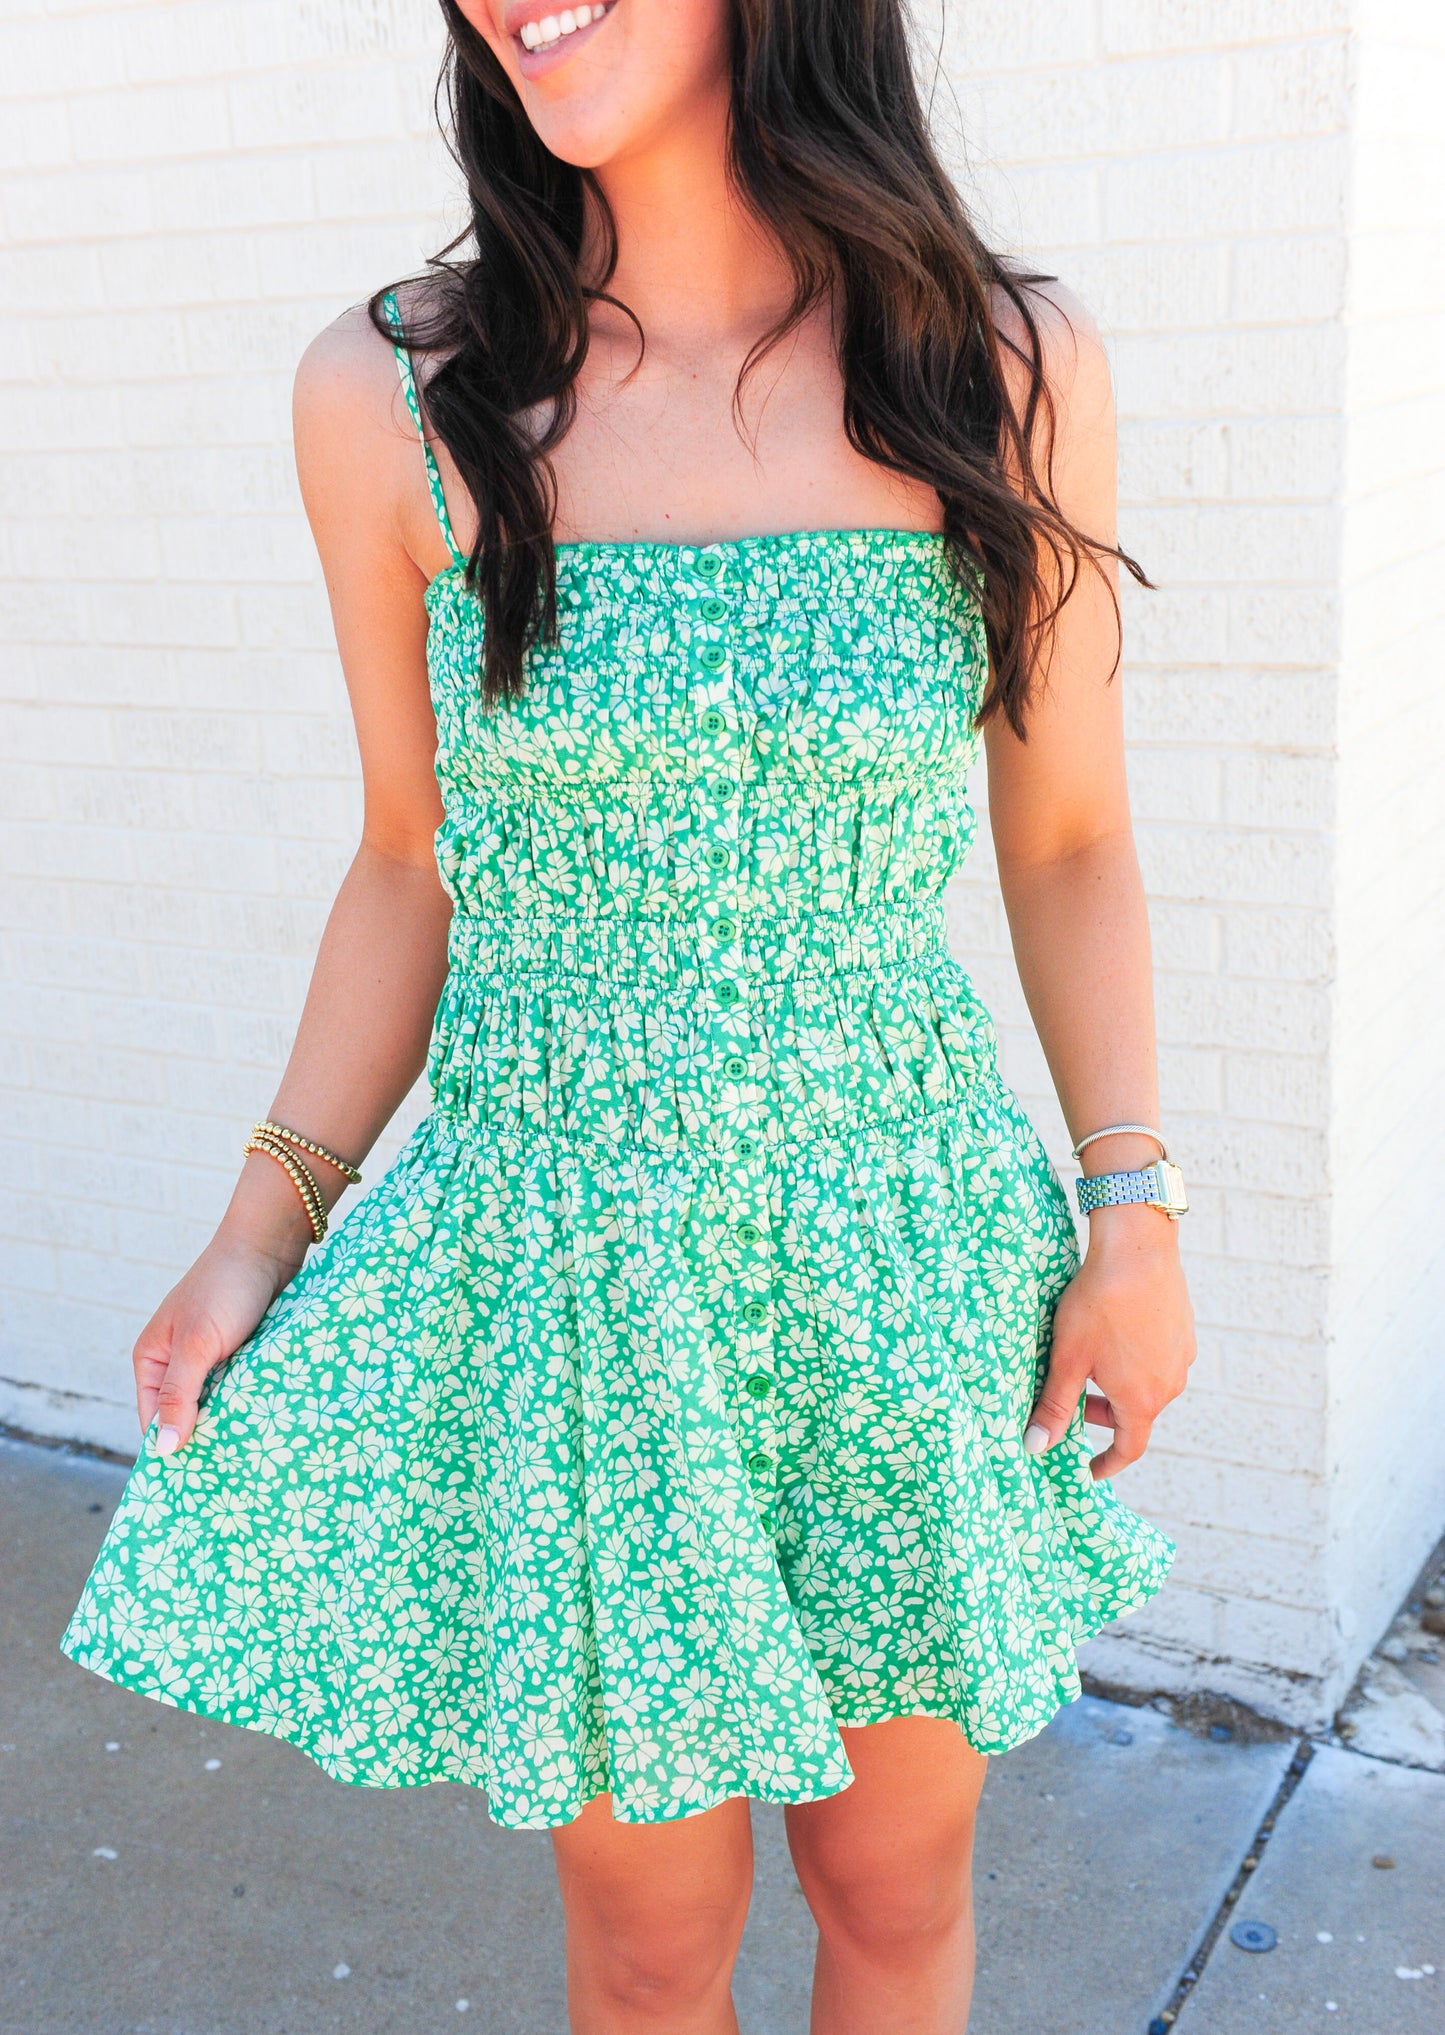 THE FLORAL SUNDRESS